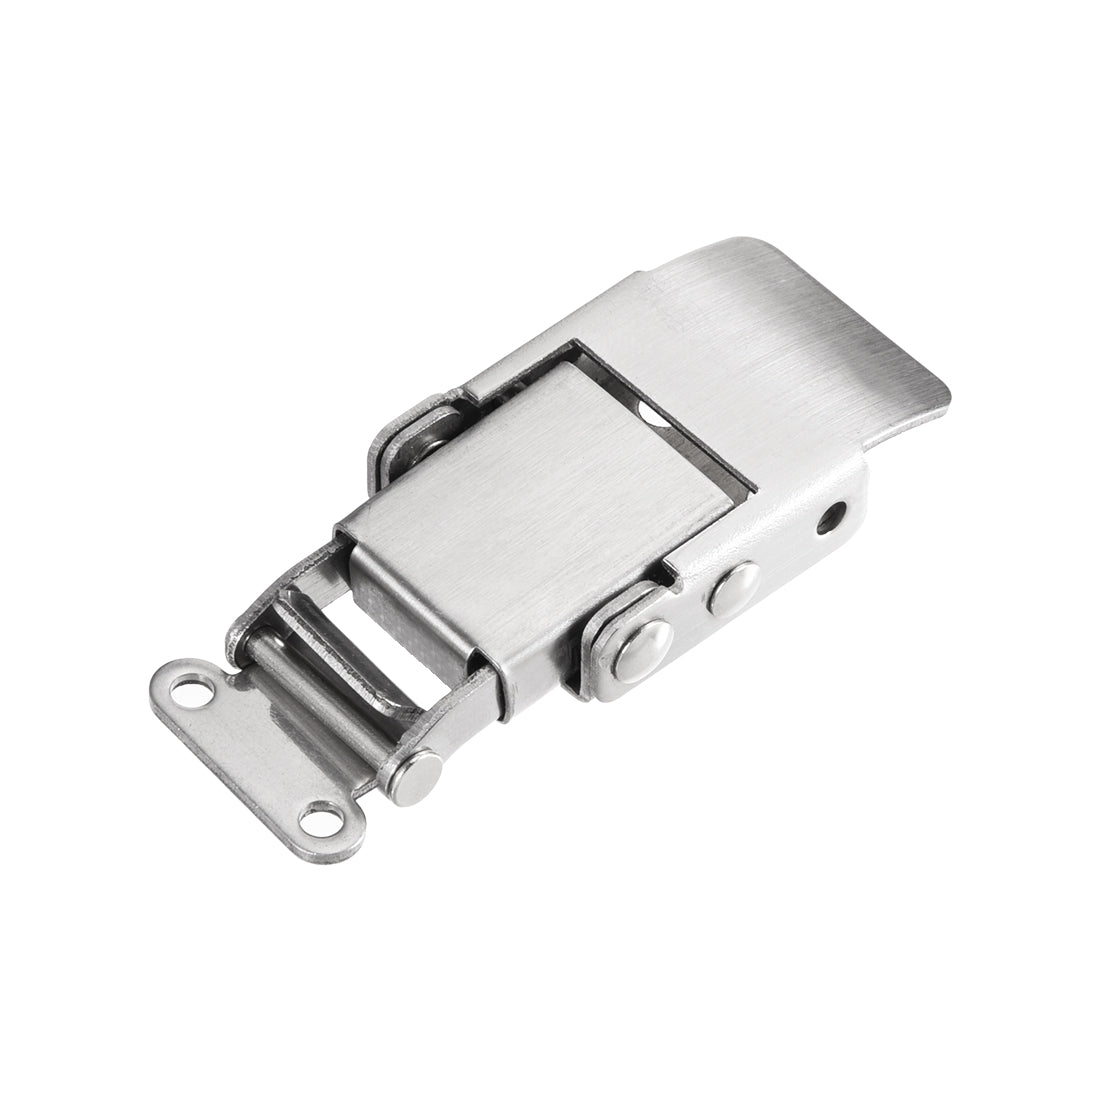 uxcell Uxcell 1 pcs Iron Spring Loaded Toggle Case Box Chest Trunk Latch Catches Hasps Clamps, 70mm Overall Length